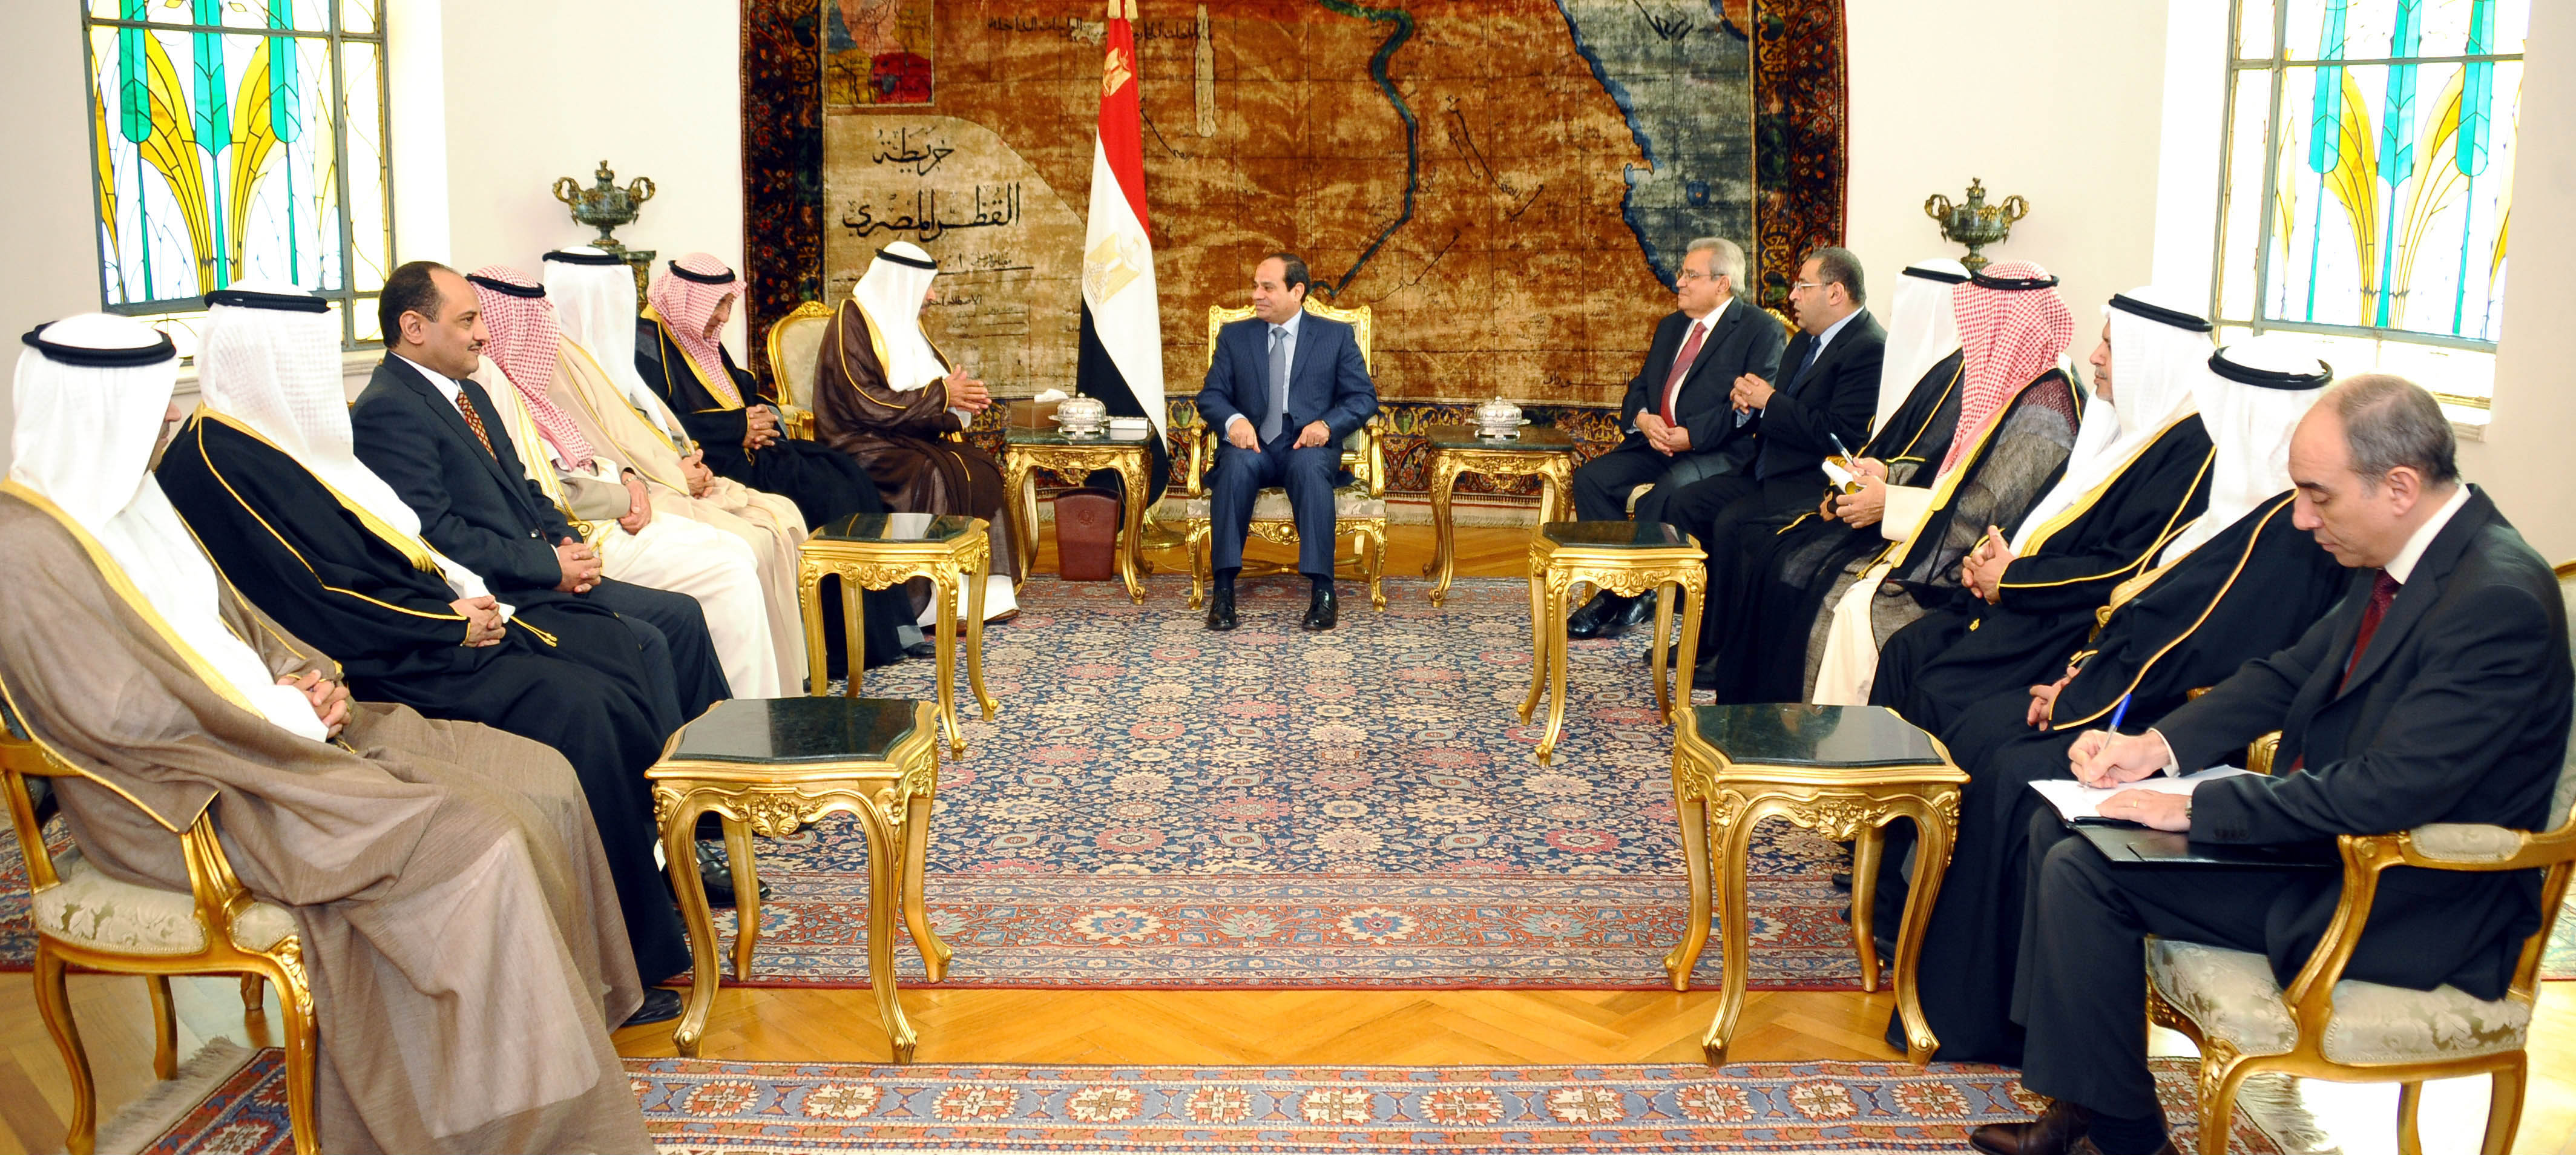 Egypt's President Abdulfattah Al-Sisi meets with members of a Kuwaiti cultural center